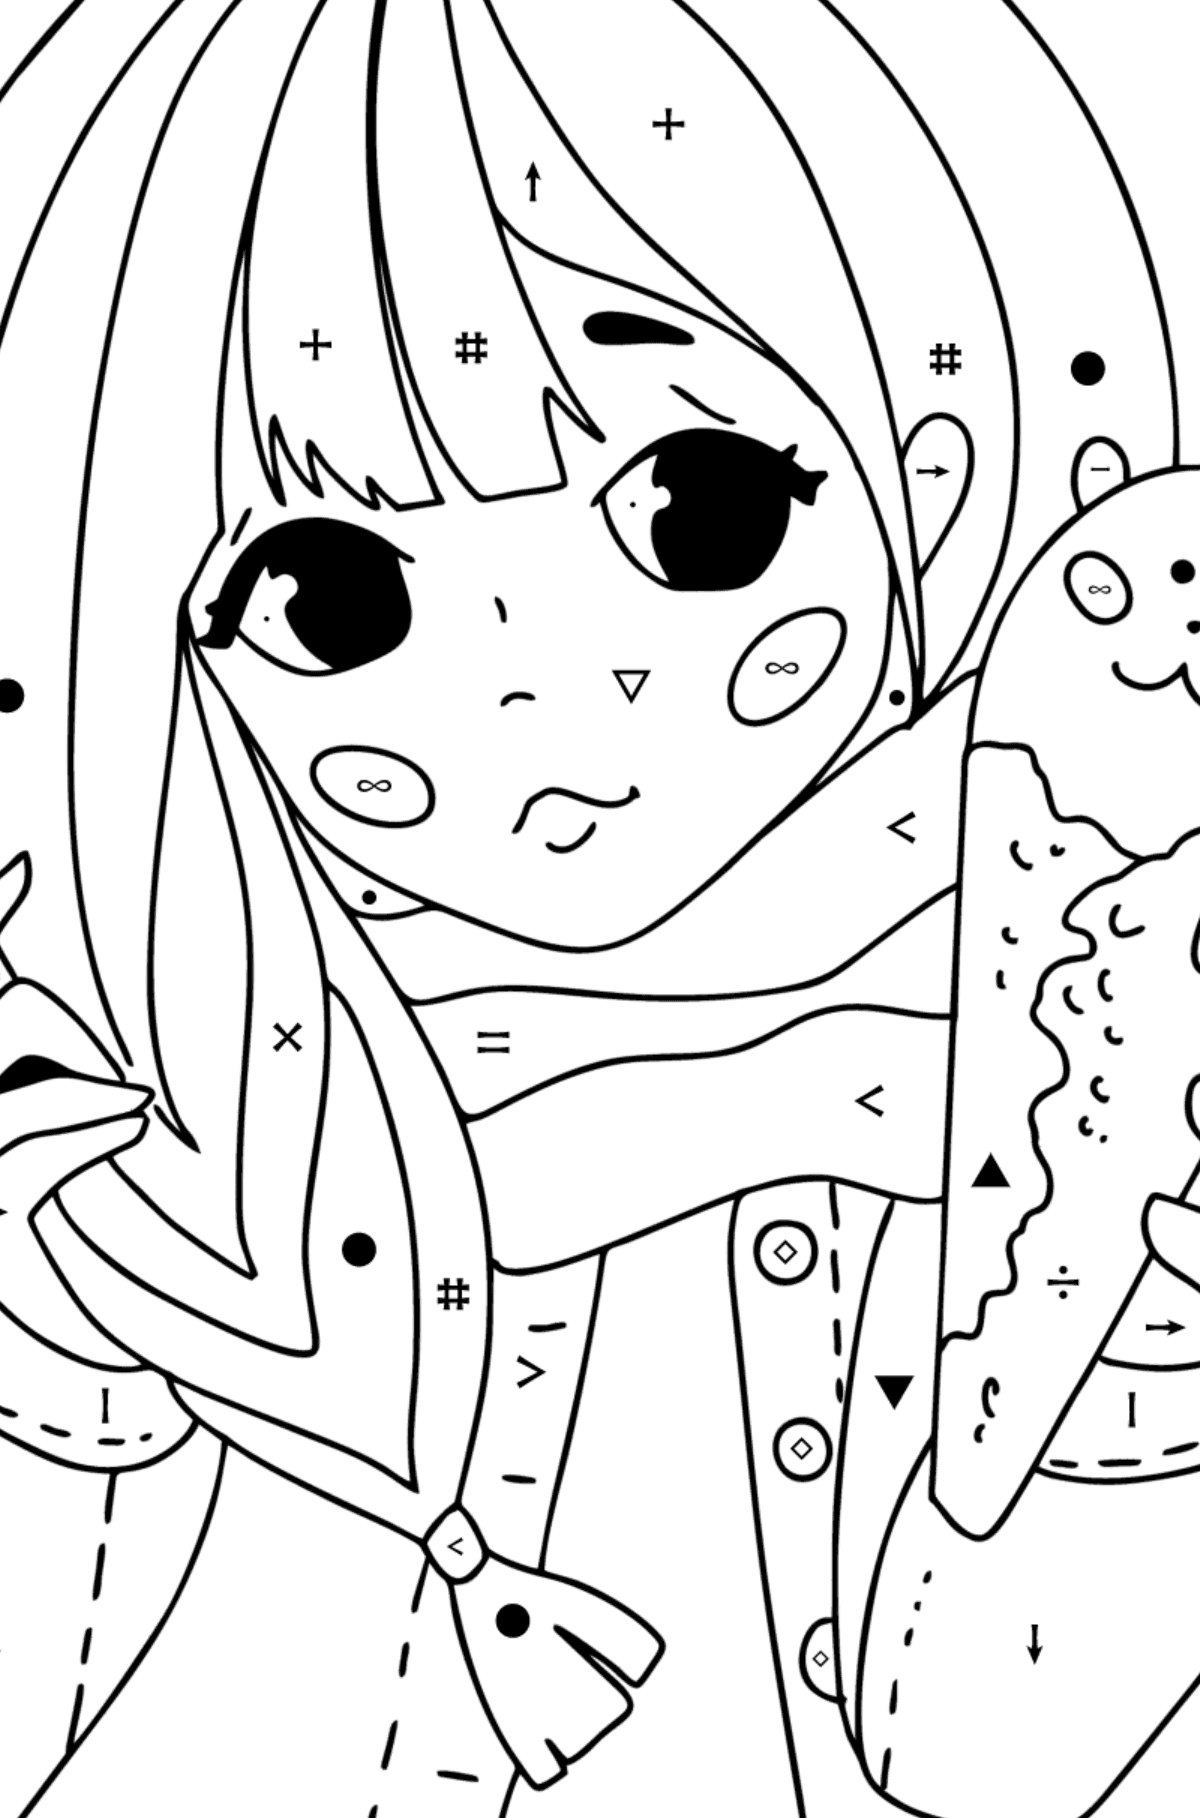 Pretty anime girl coloring page - Coloring by Symbols for Kids